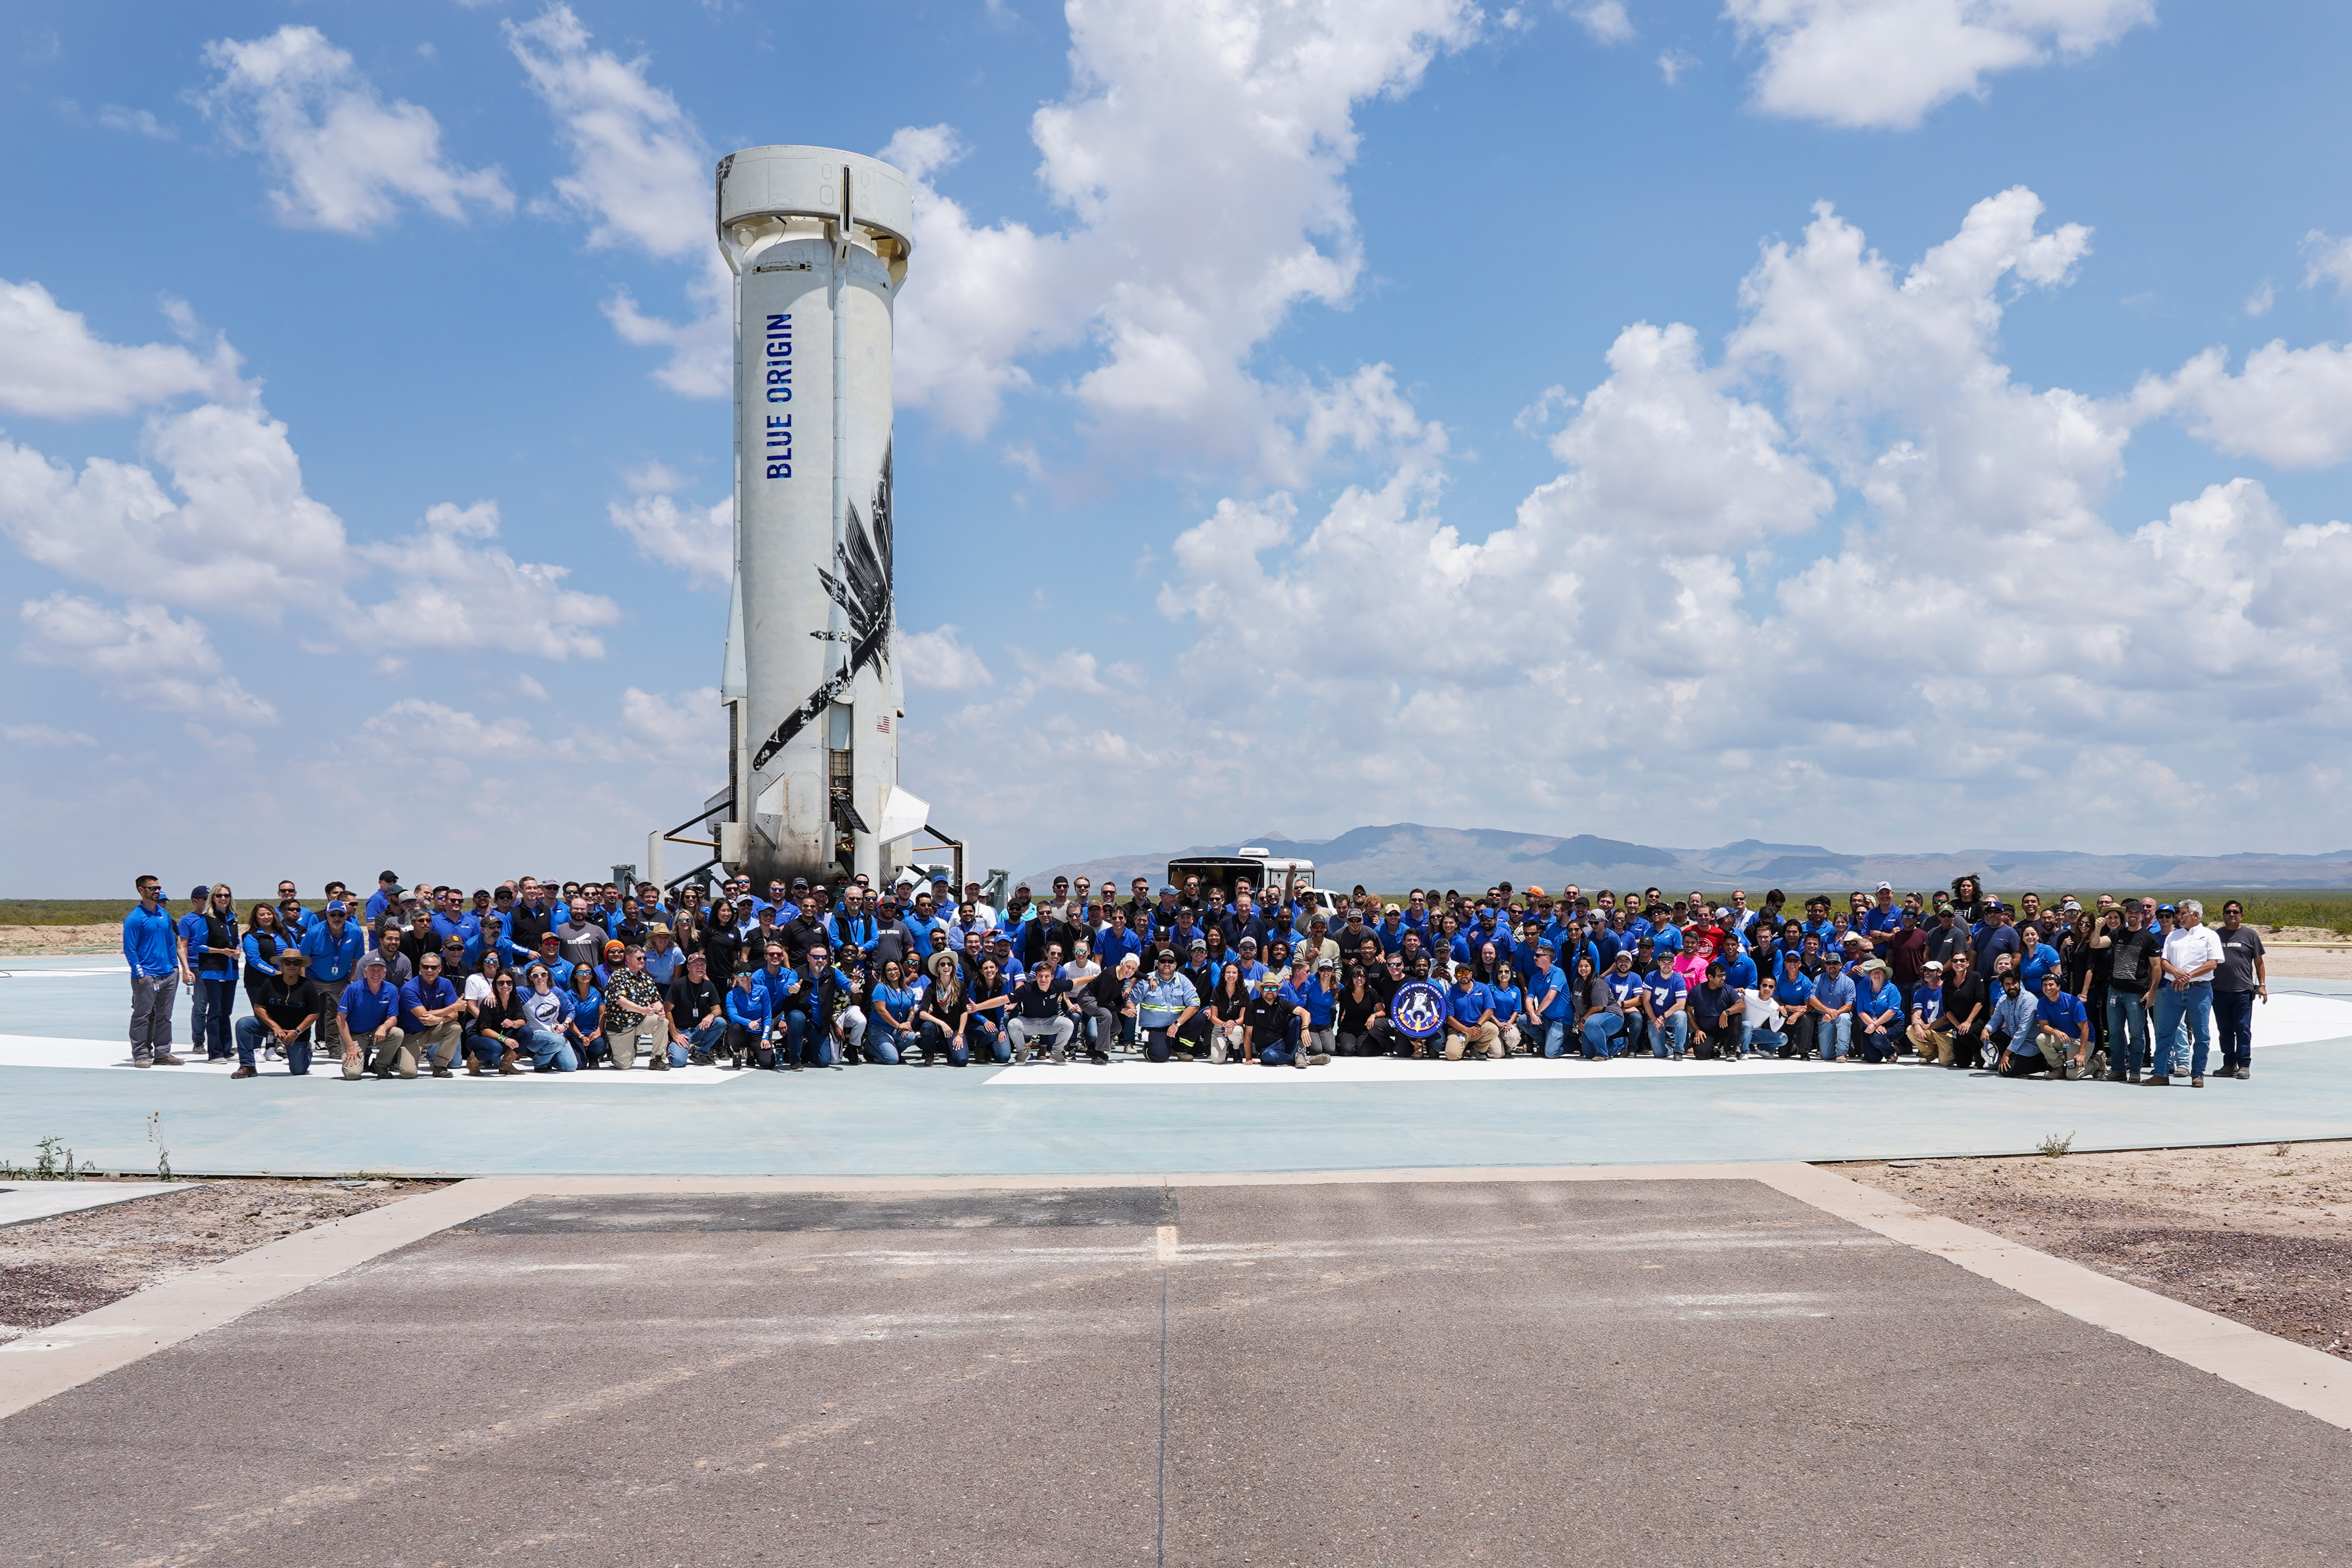 Hundreds of Blue Origin employees stand and kneel in multiple rows on the landing pad in front of the booster that powered New Shepard's first four crew members to space. An employee in the center of the first row holds a sign emblazoned with the First Human Flight mission patch; white billowy clouds fill the blue sky.